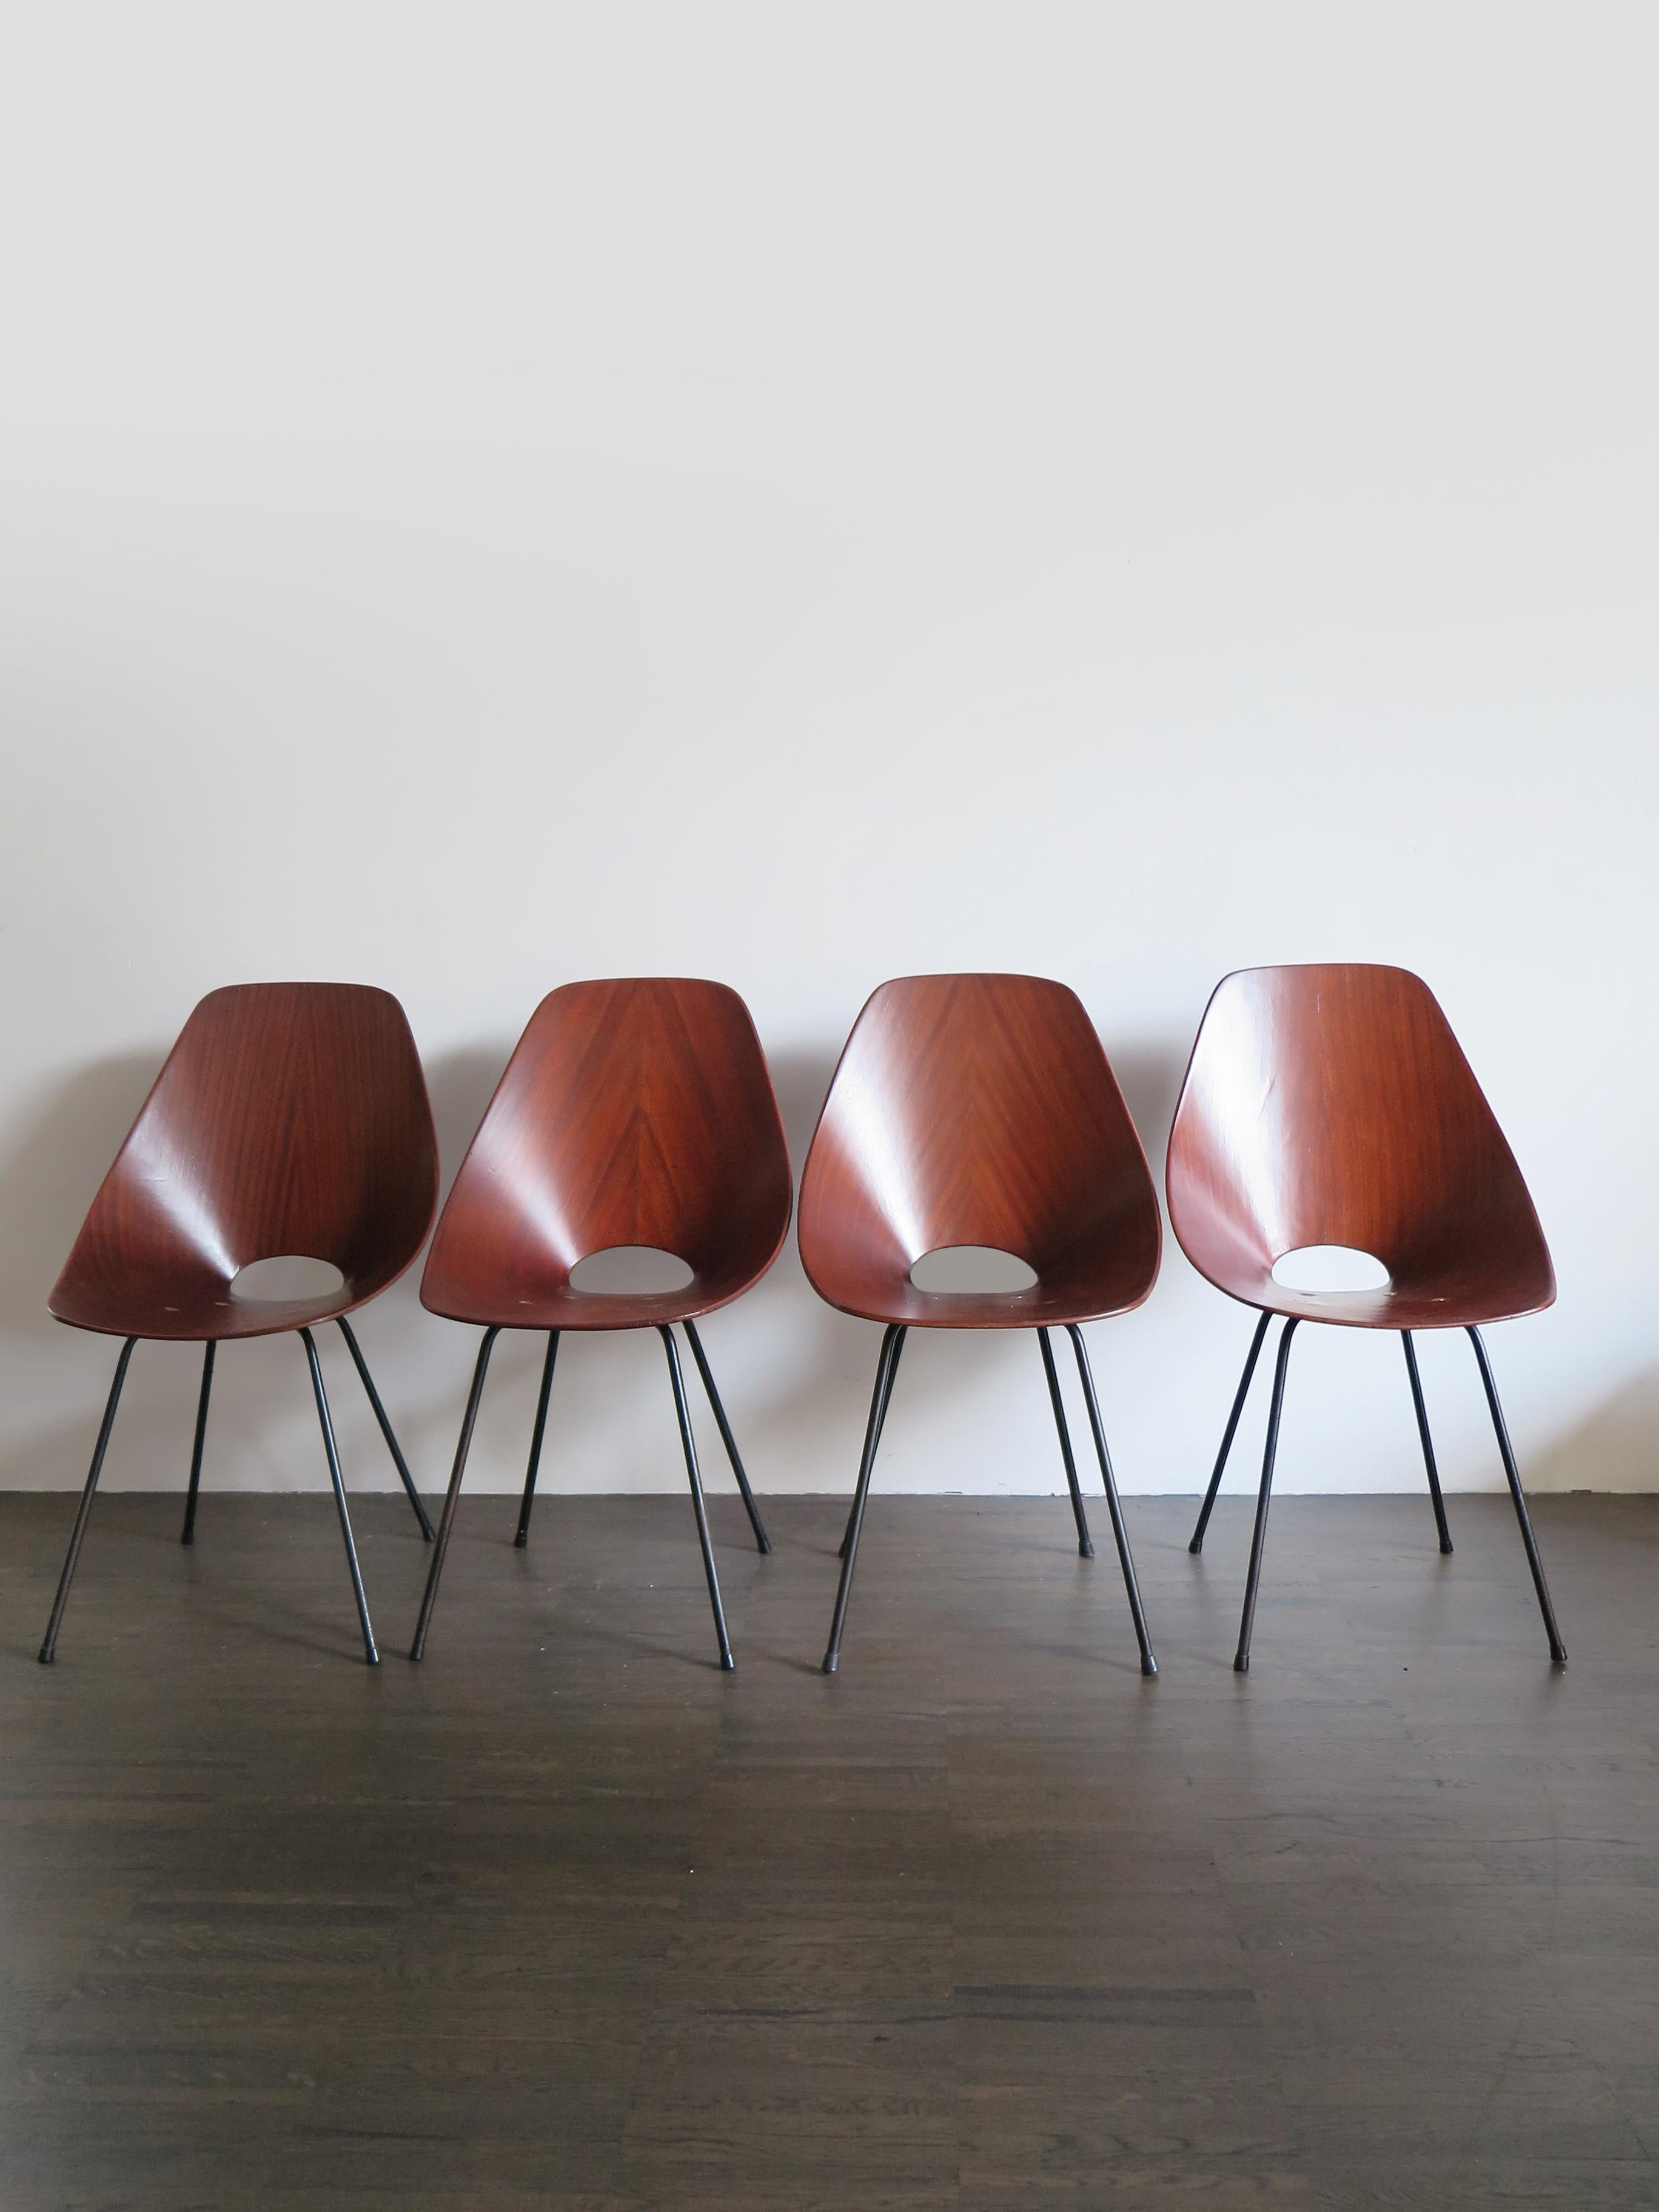 Italian midcentury set of four dining chairs model Medea designed by Vittorio Nobili and produced by Fratelli Tagliabue,
veneered plywood, lacquered metal, this chair won the prestigious price “Compasso d’Oro in 1956.

Bibliography: G. Gramigna,